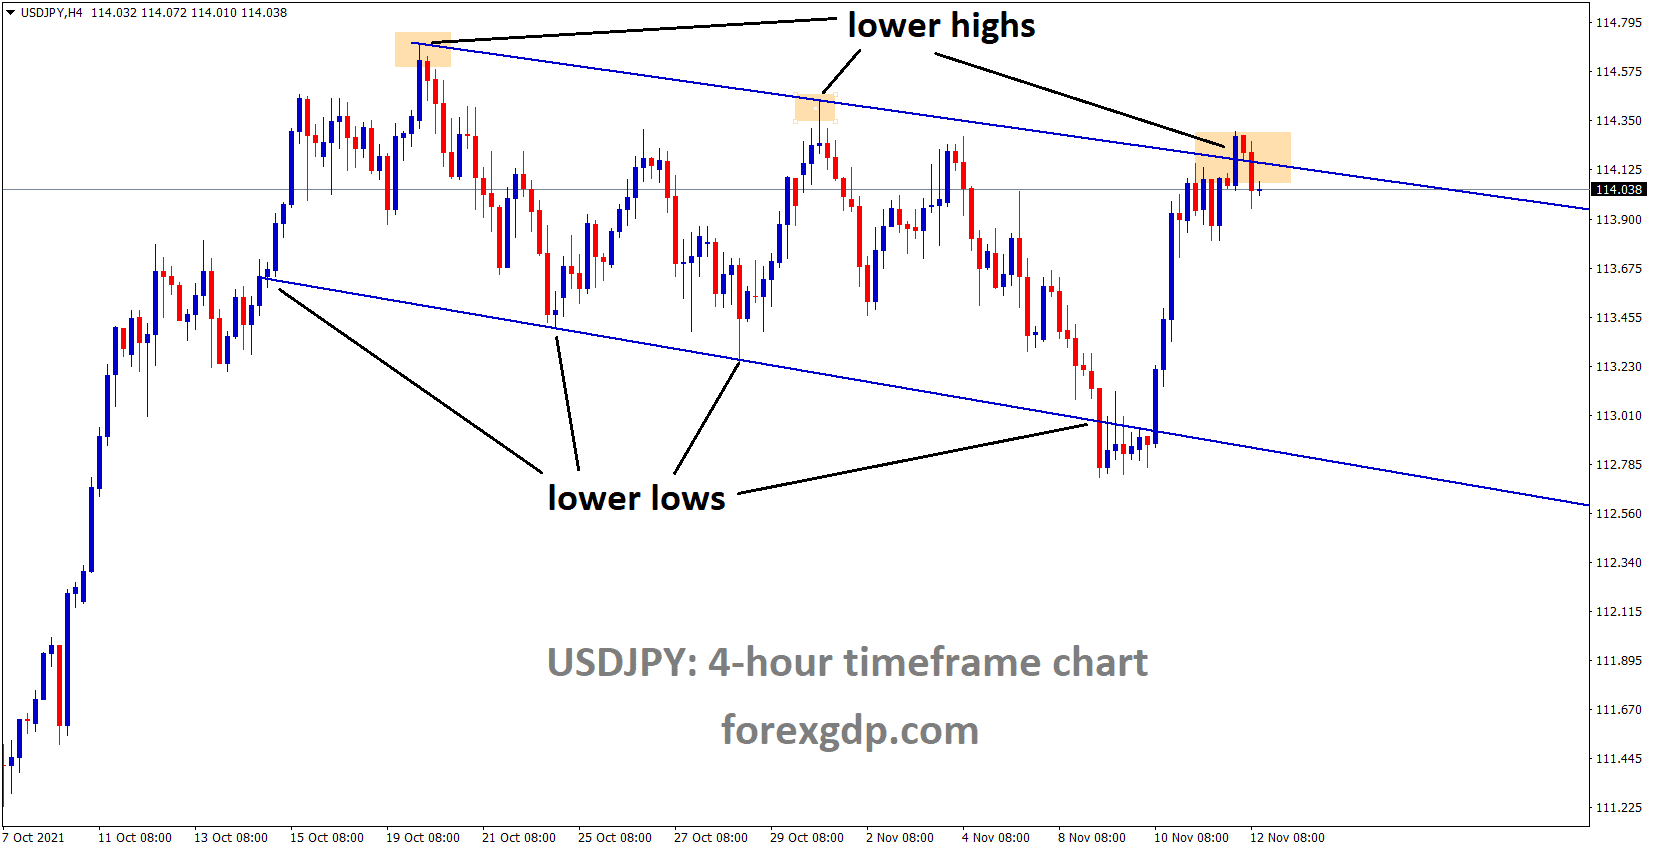 USDJPY is moving in the Descending channel and reached the lower high area of the channel